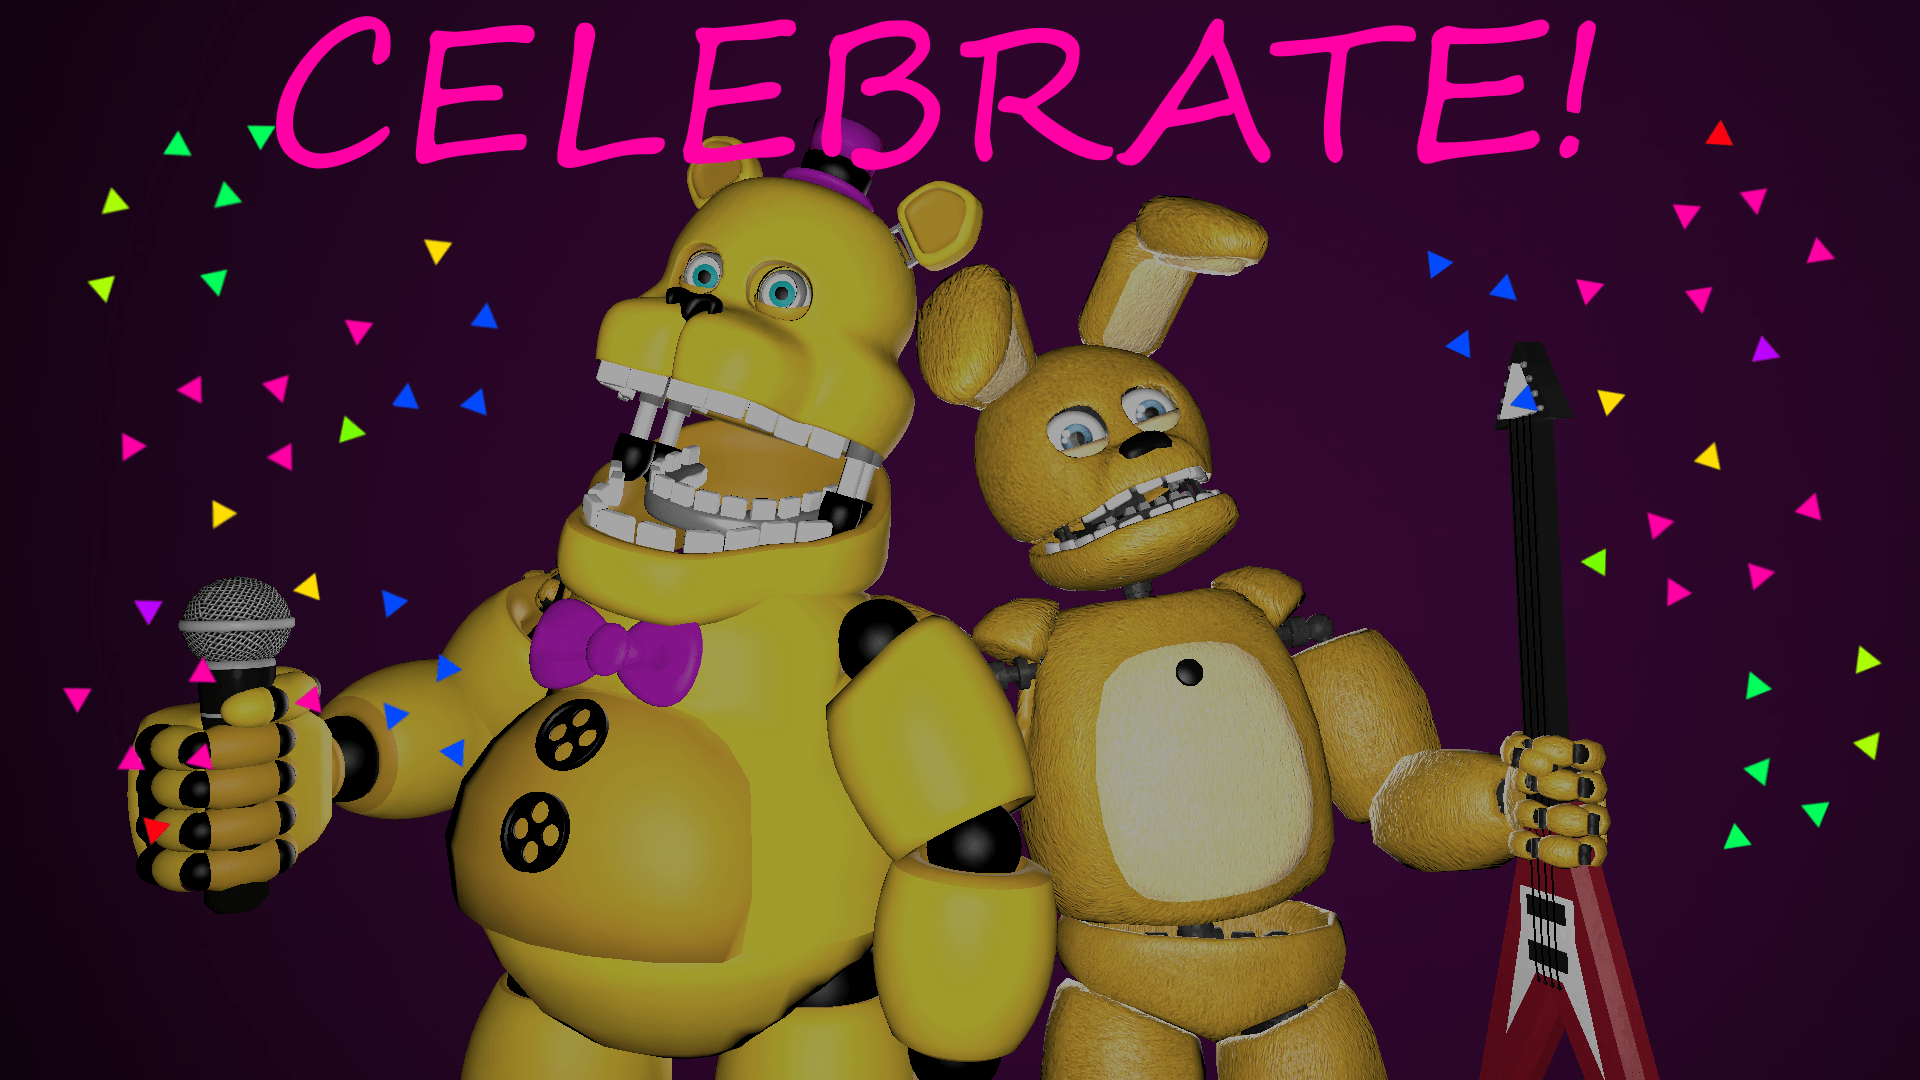 Made a Celebrate! title with the new Fredbear and Springbonnie